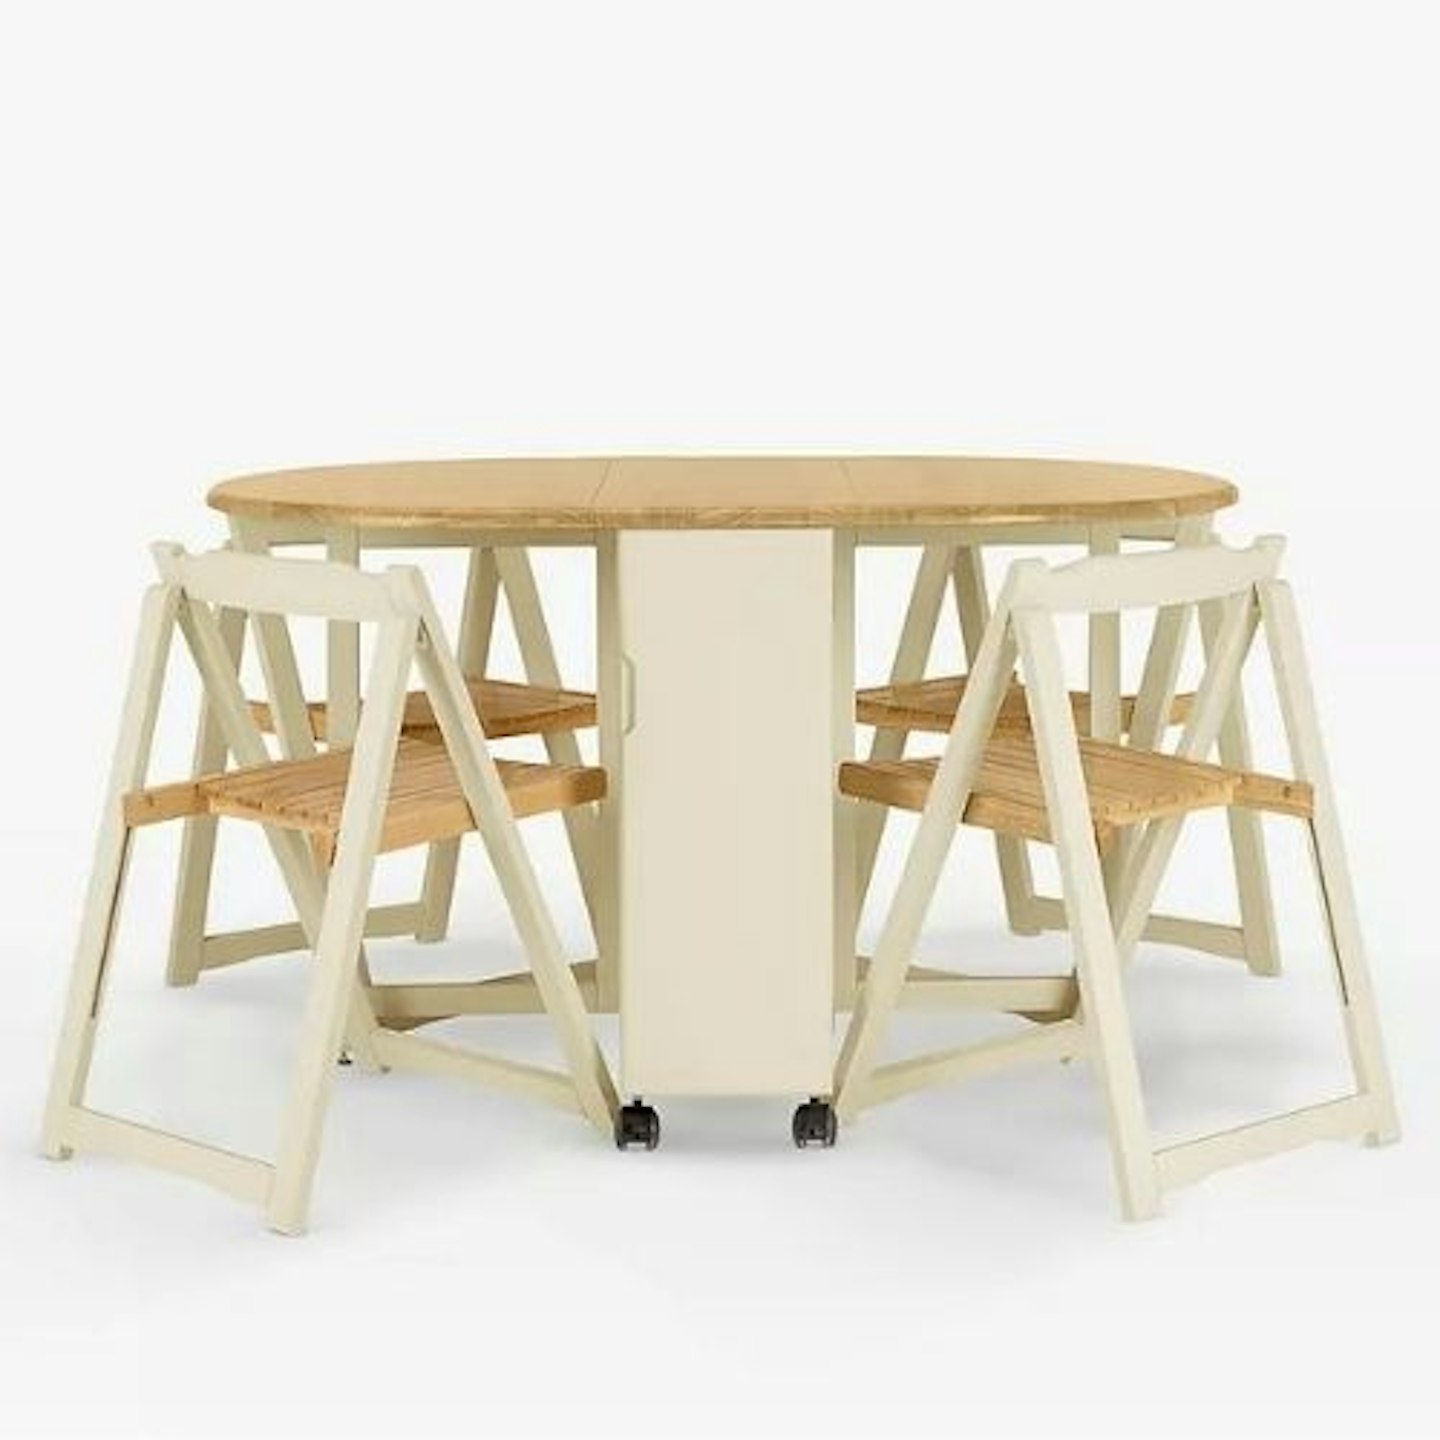 ANYDAY John Lewis & Partners Adler Butterfly Drop Leaf Folding Dining Table and Four Chairs